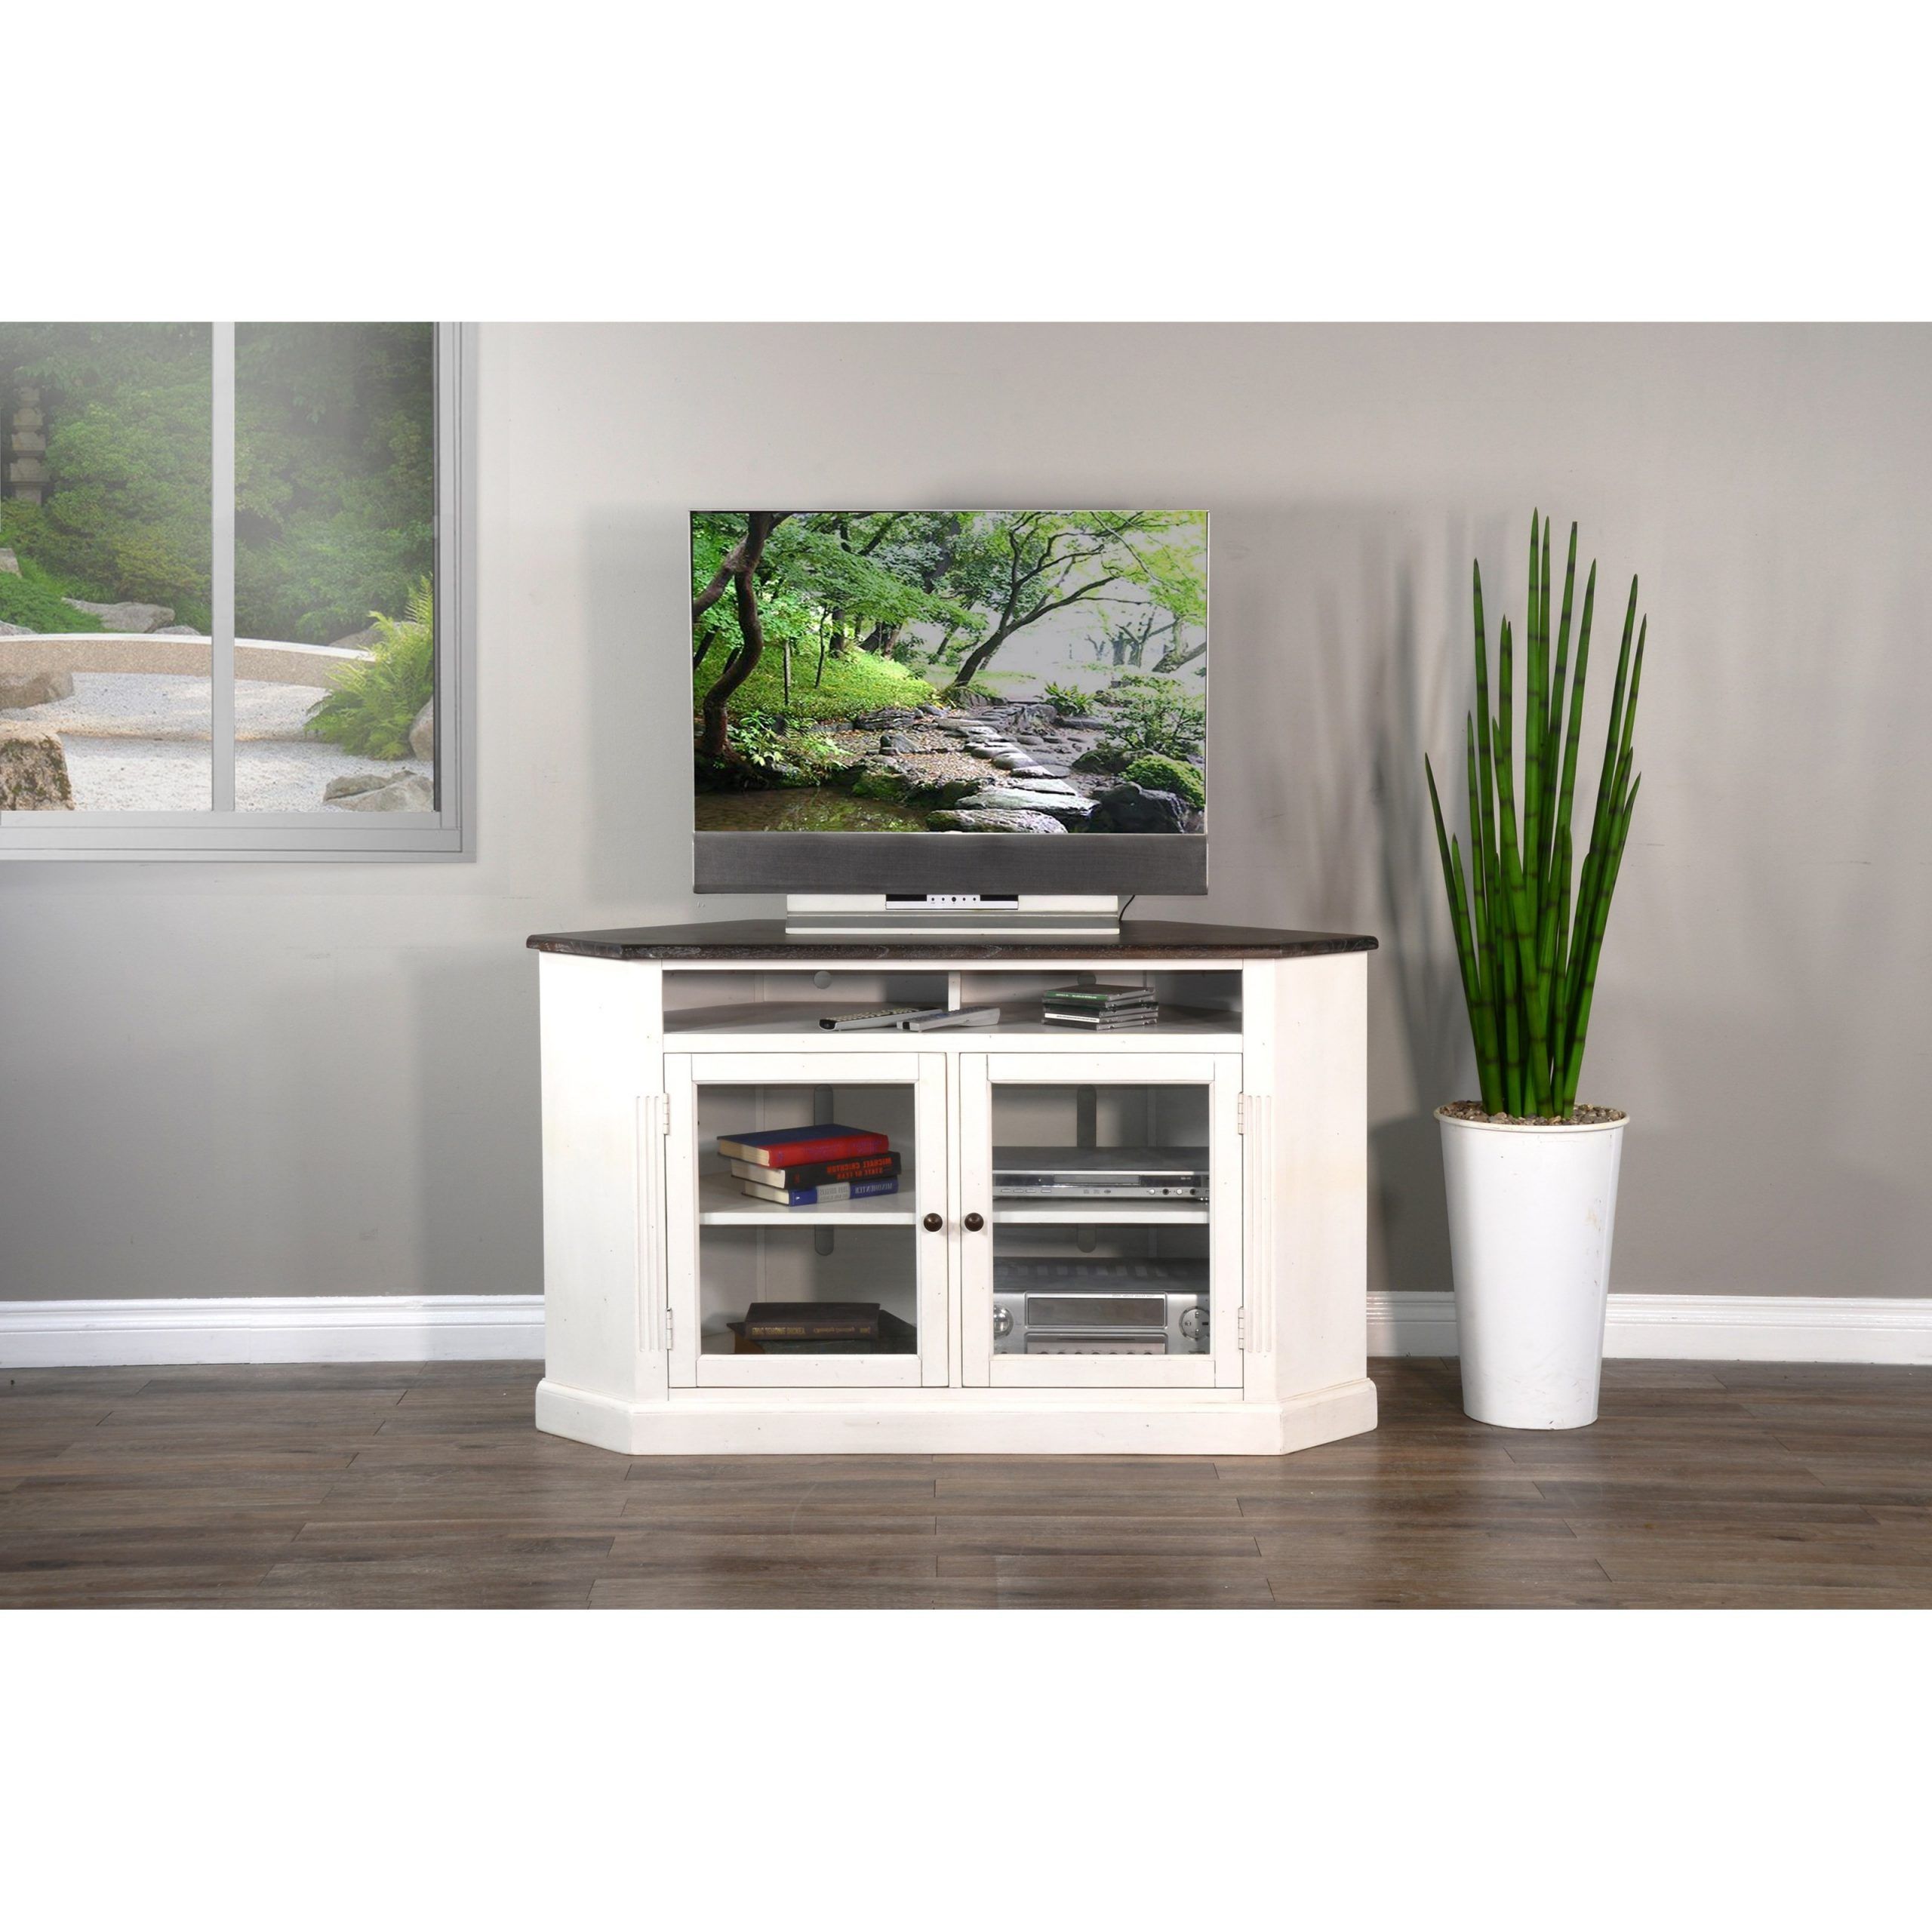 Sunny Designs 3635 Corner Tv Stand With Glass Doors Inside Modern 2 Glass Door Corner Tv Stands (View 13 of 20)